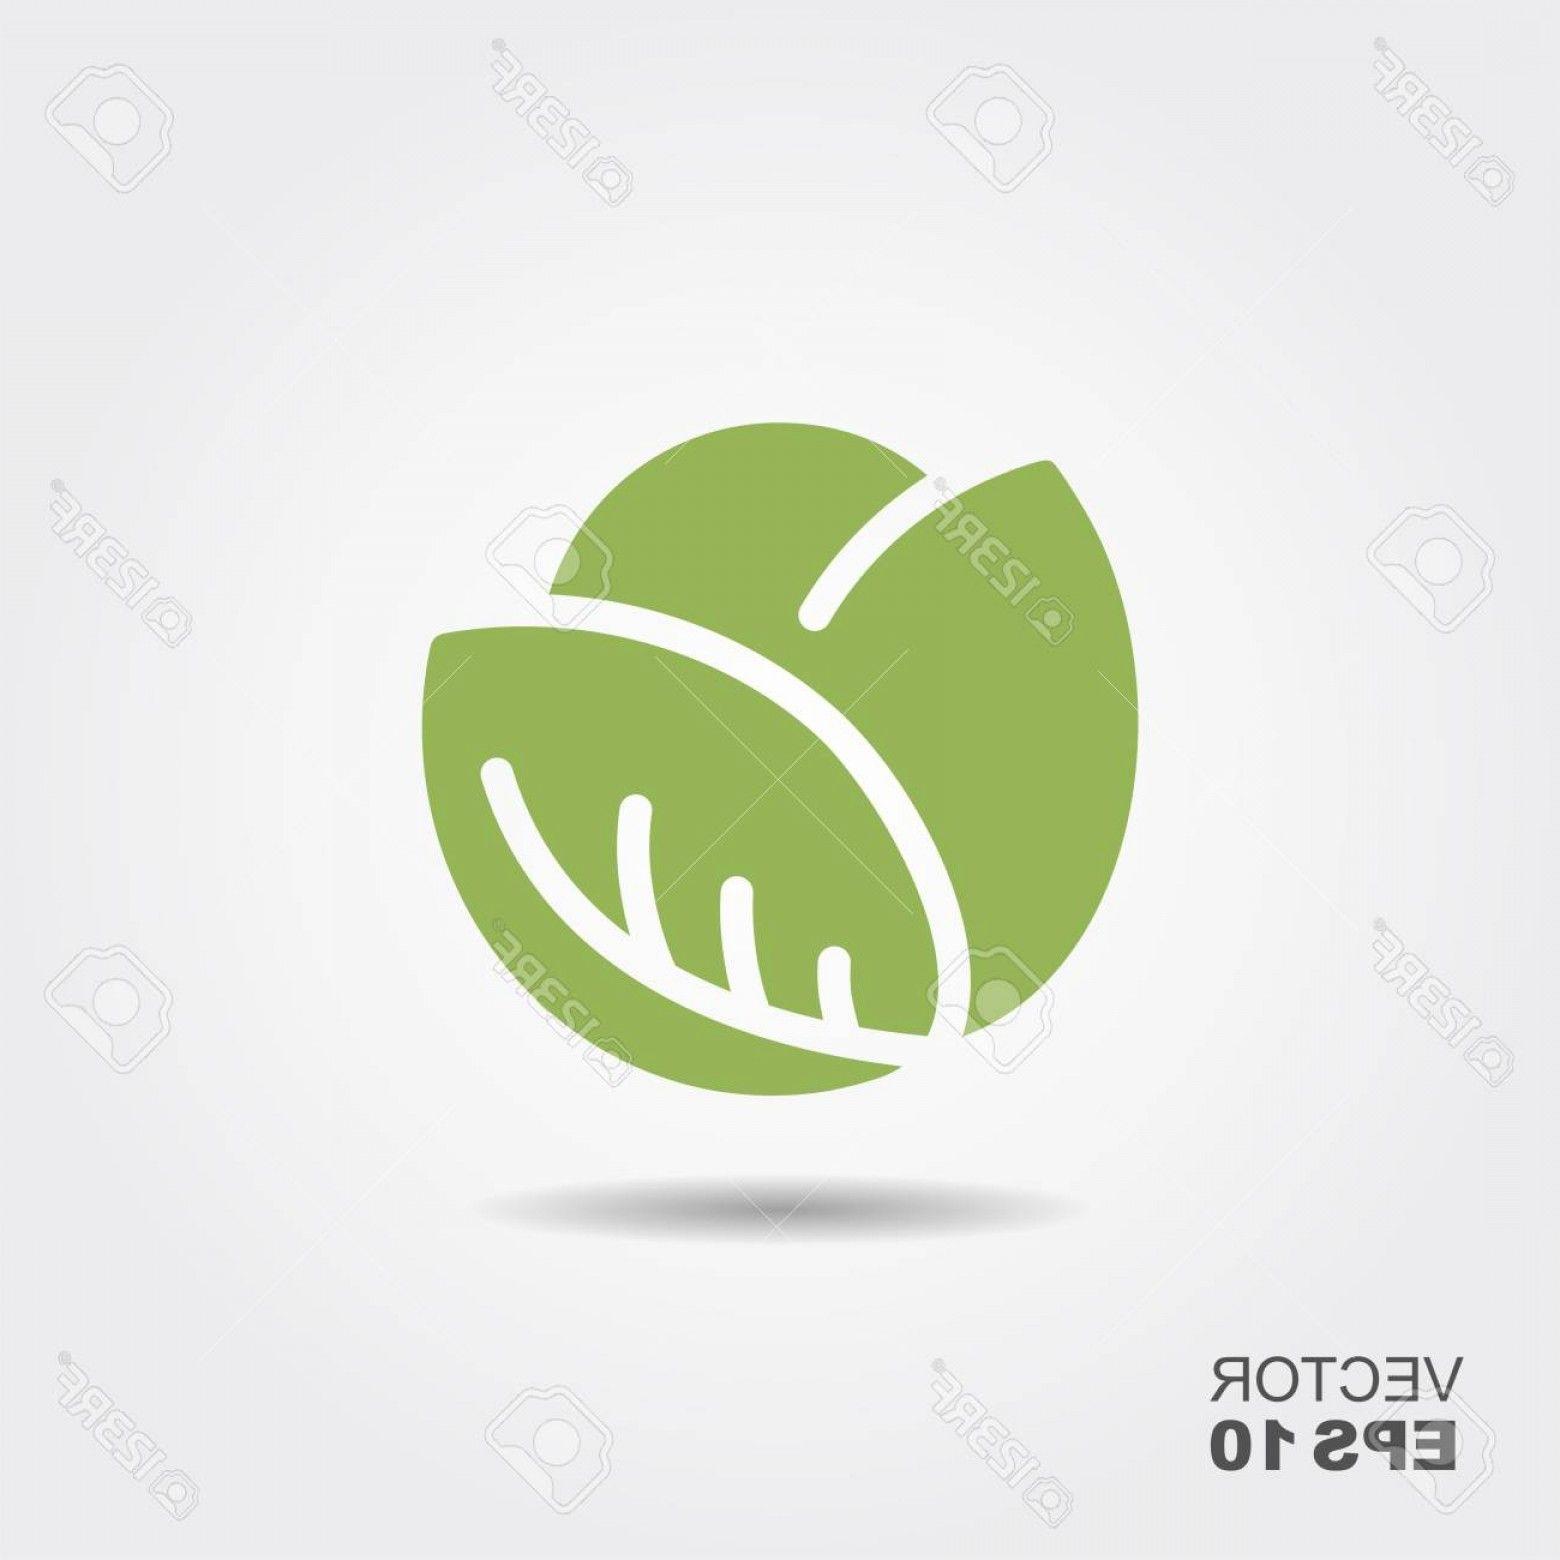 Cabbage Logo - Photostock Vector Cabbage Icon In Flat Style Isolated Object Cabbage ...